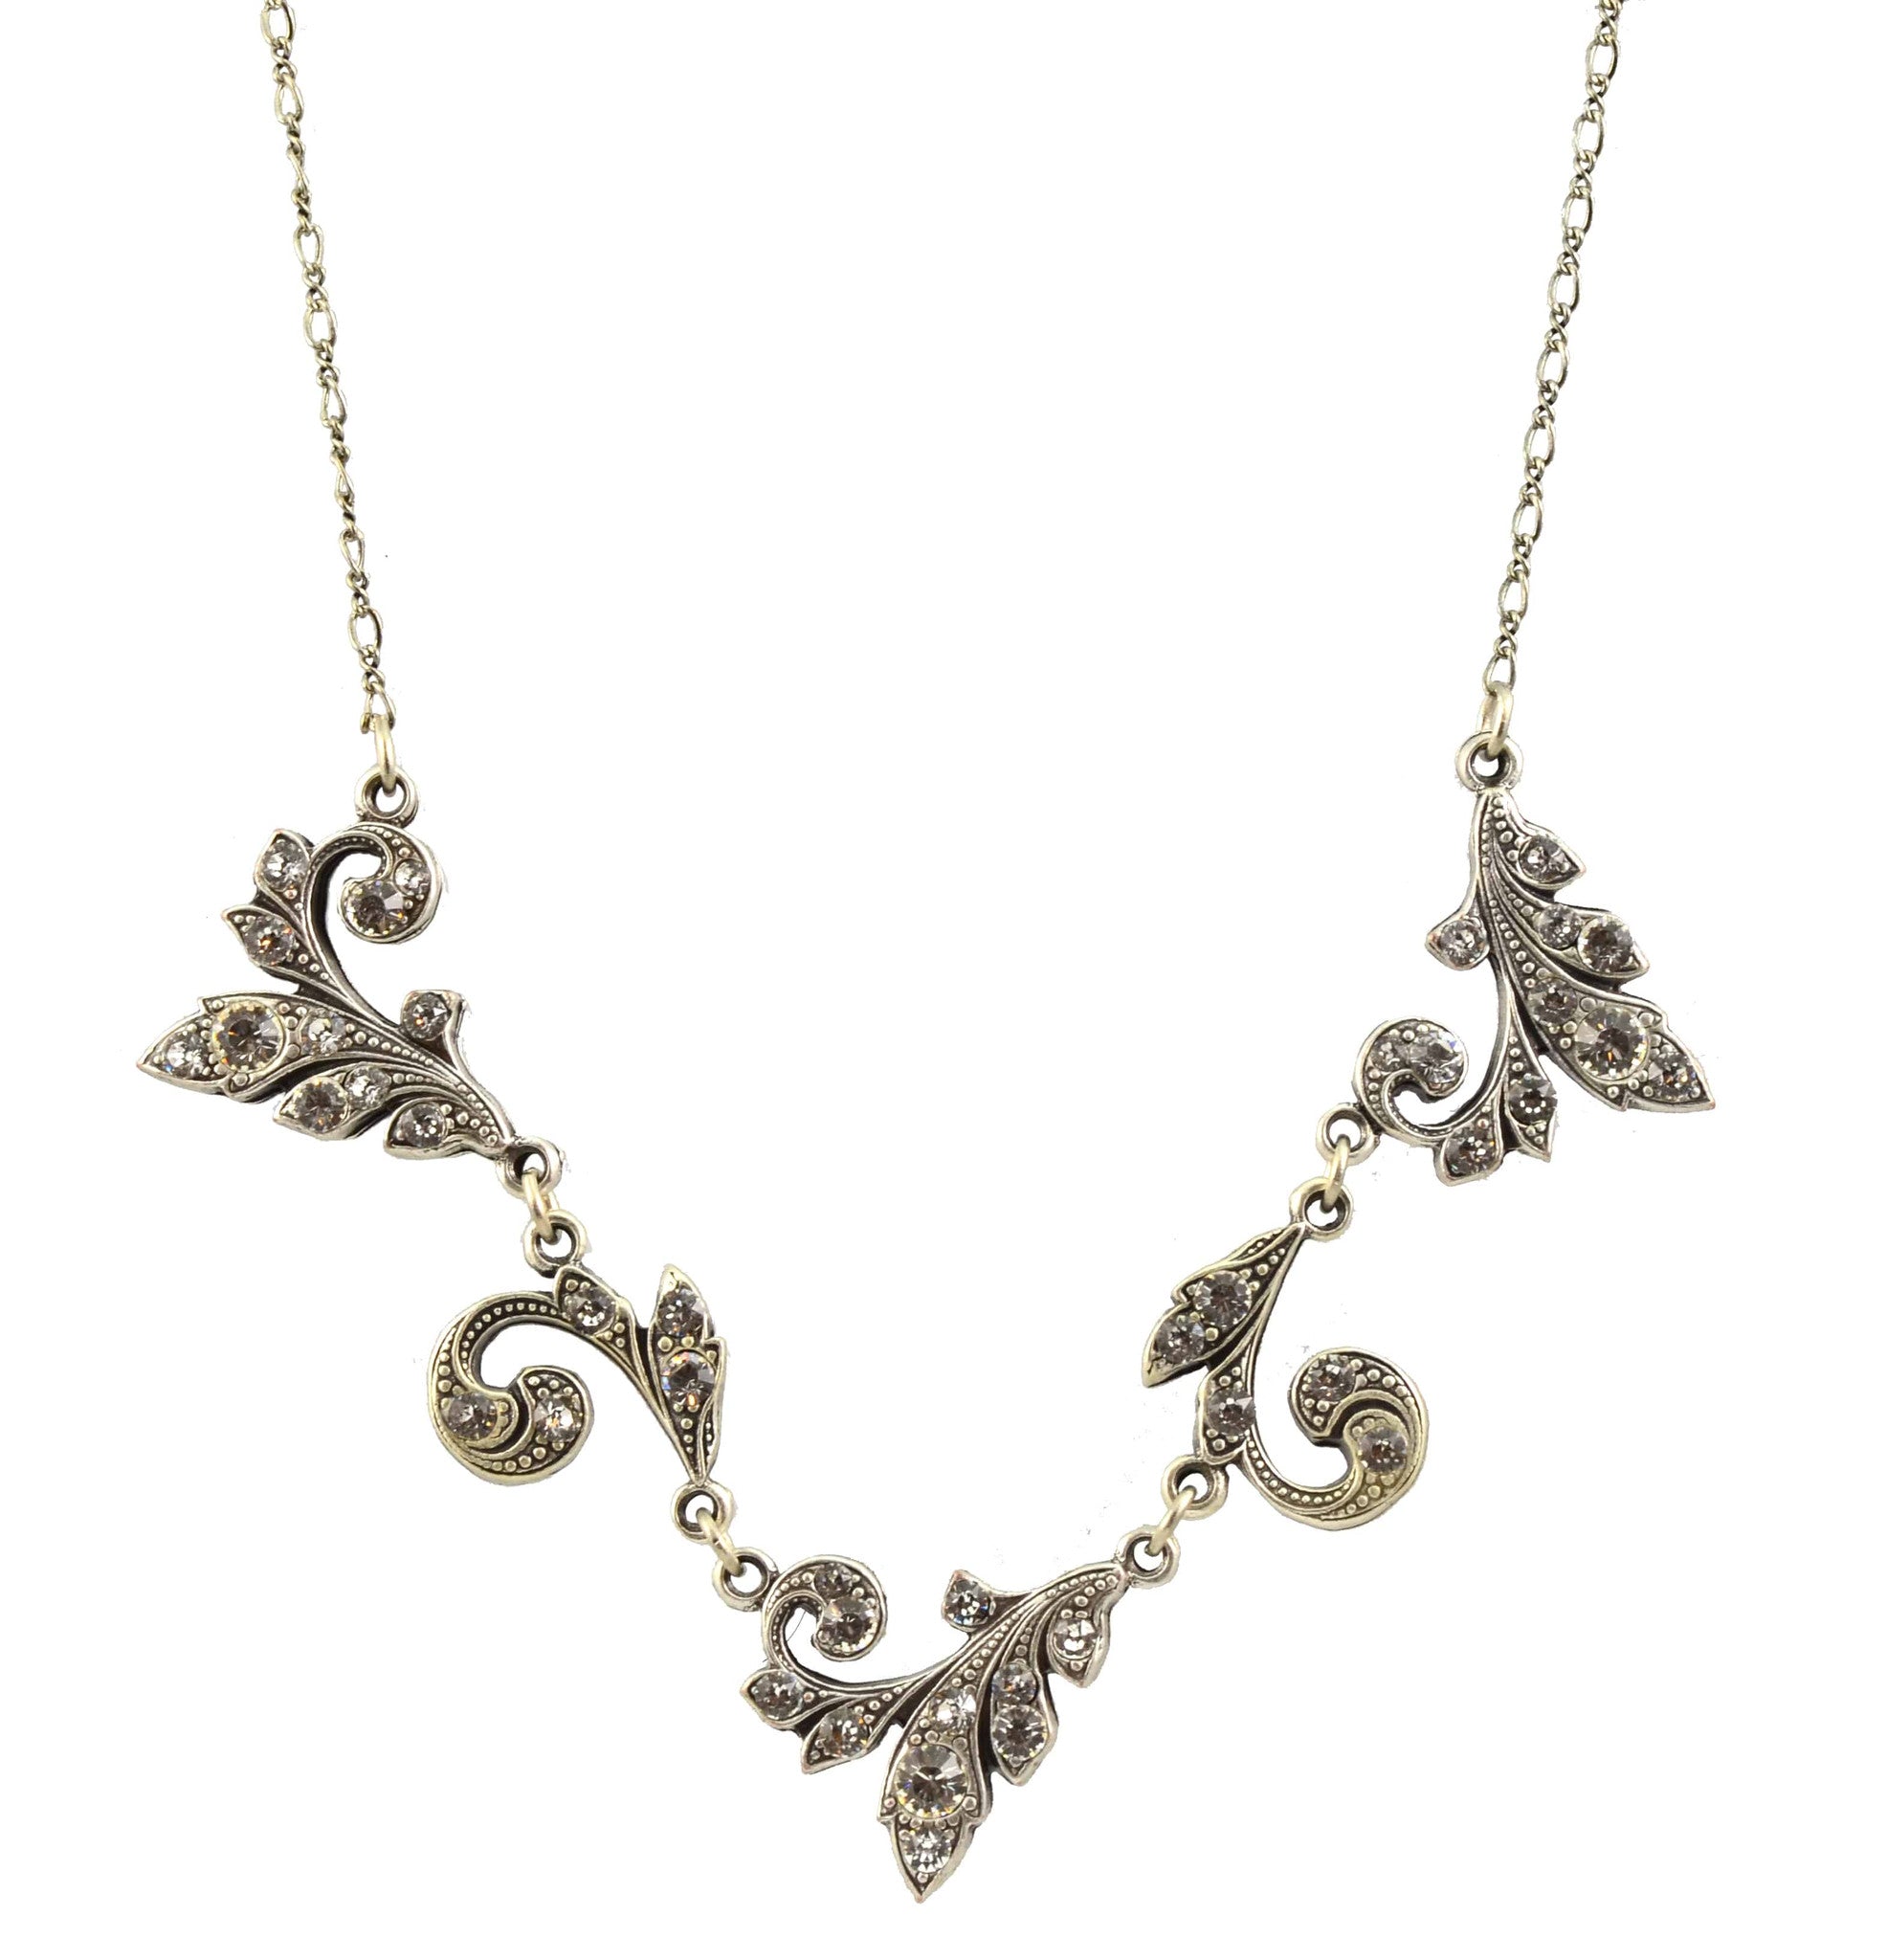 Anne Koplik Necklace, Silver Plated Swirly Ivy with crystals